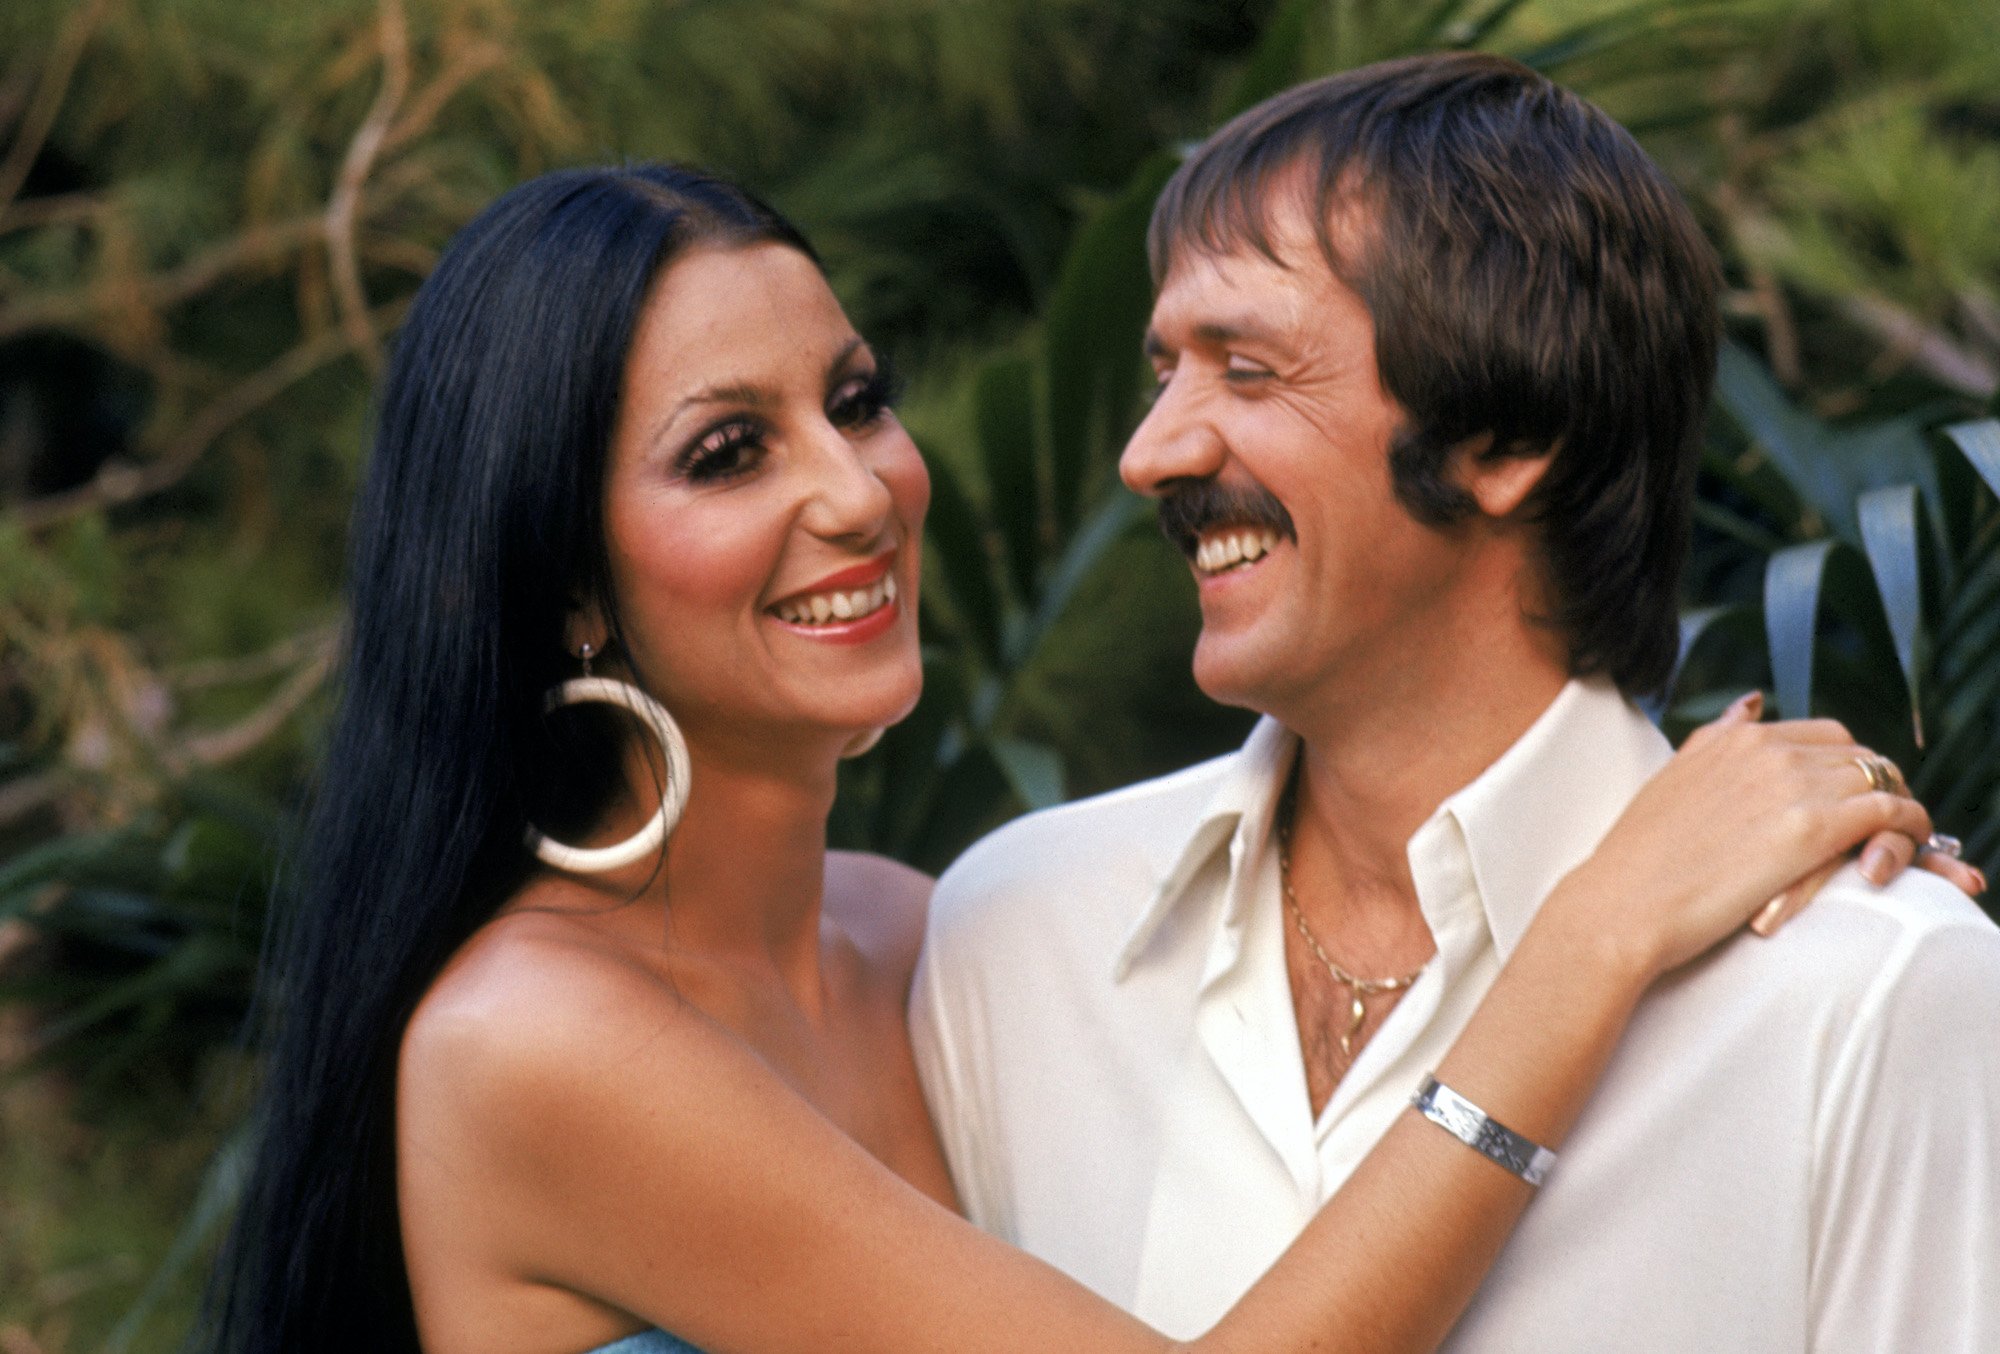 Cher and Sonny Bono